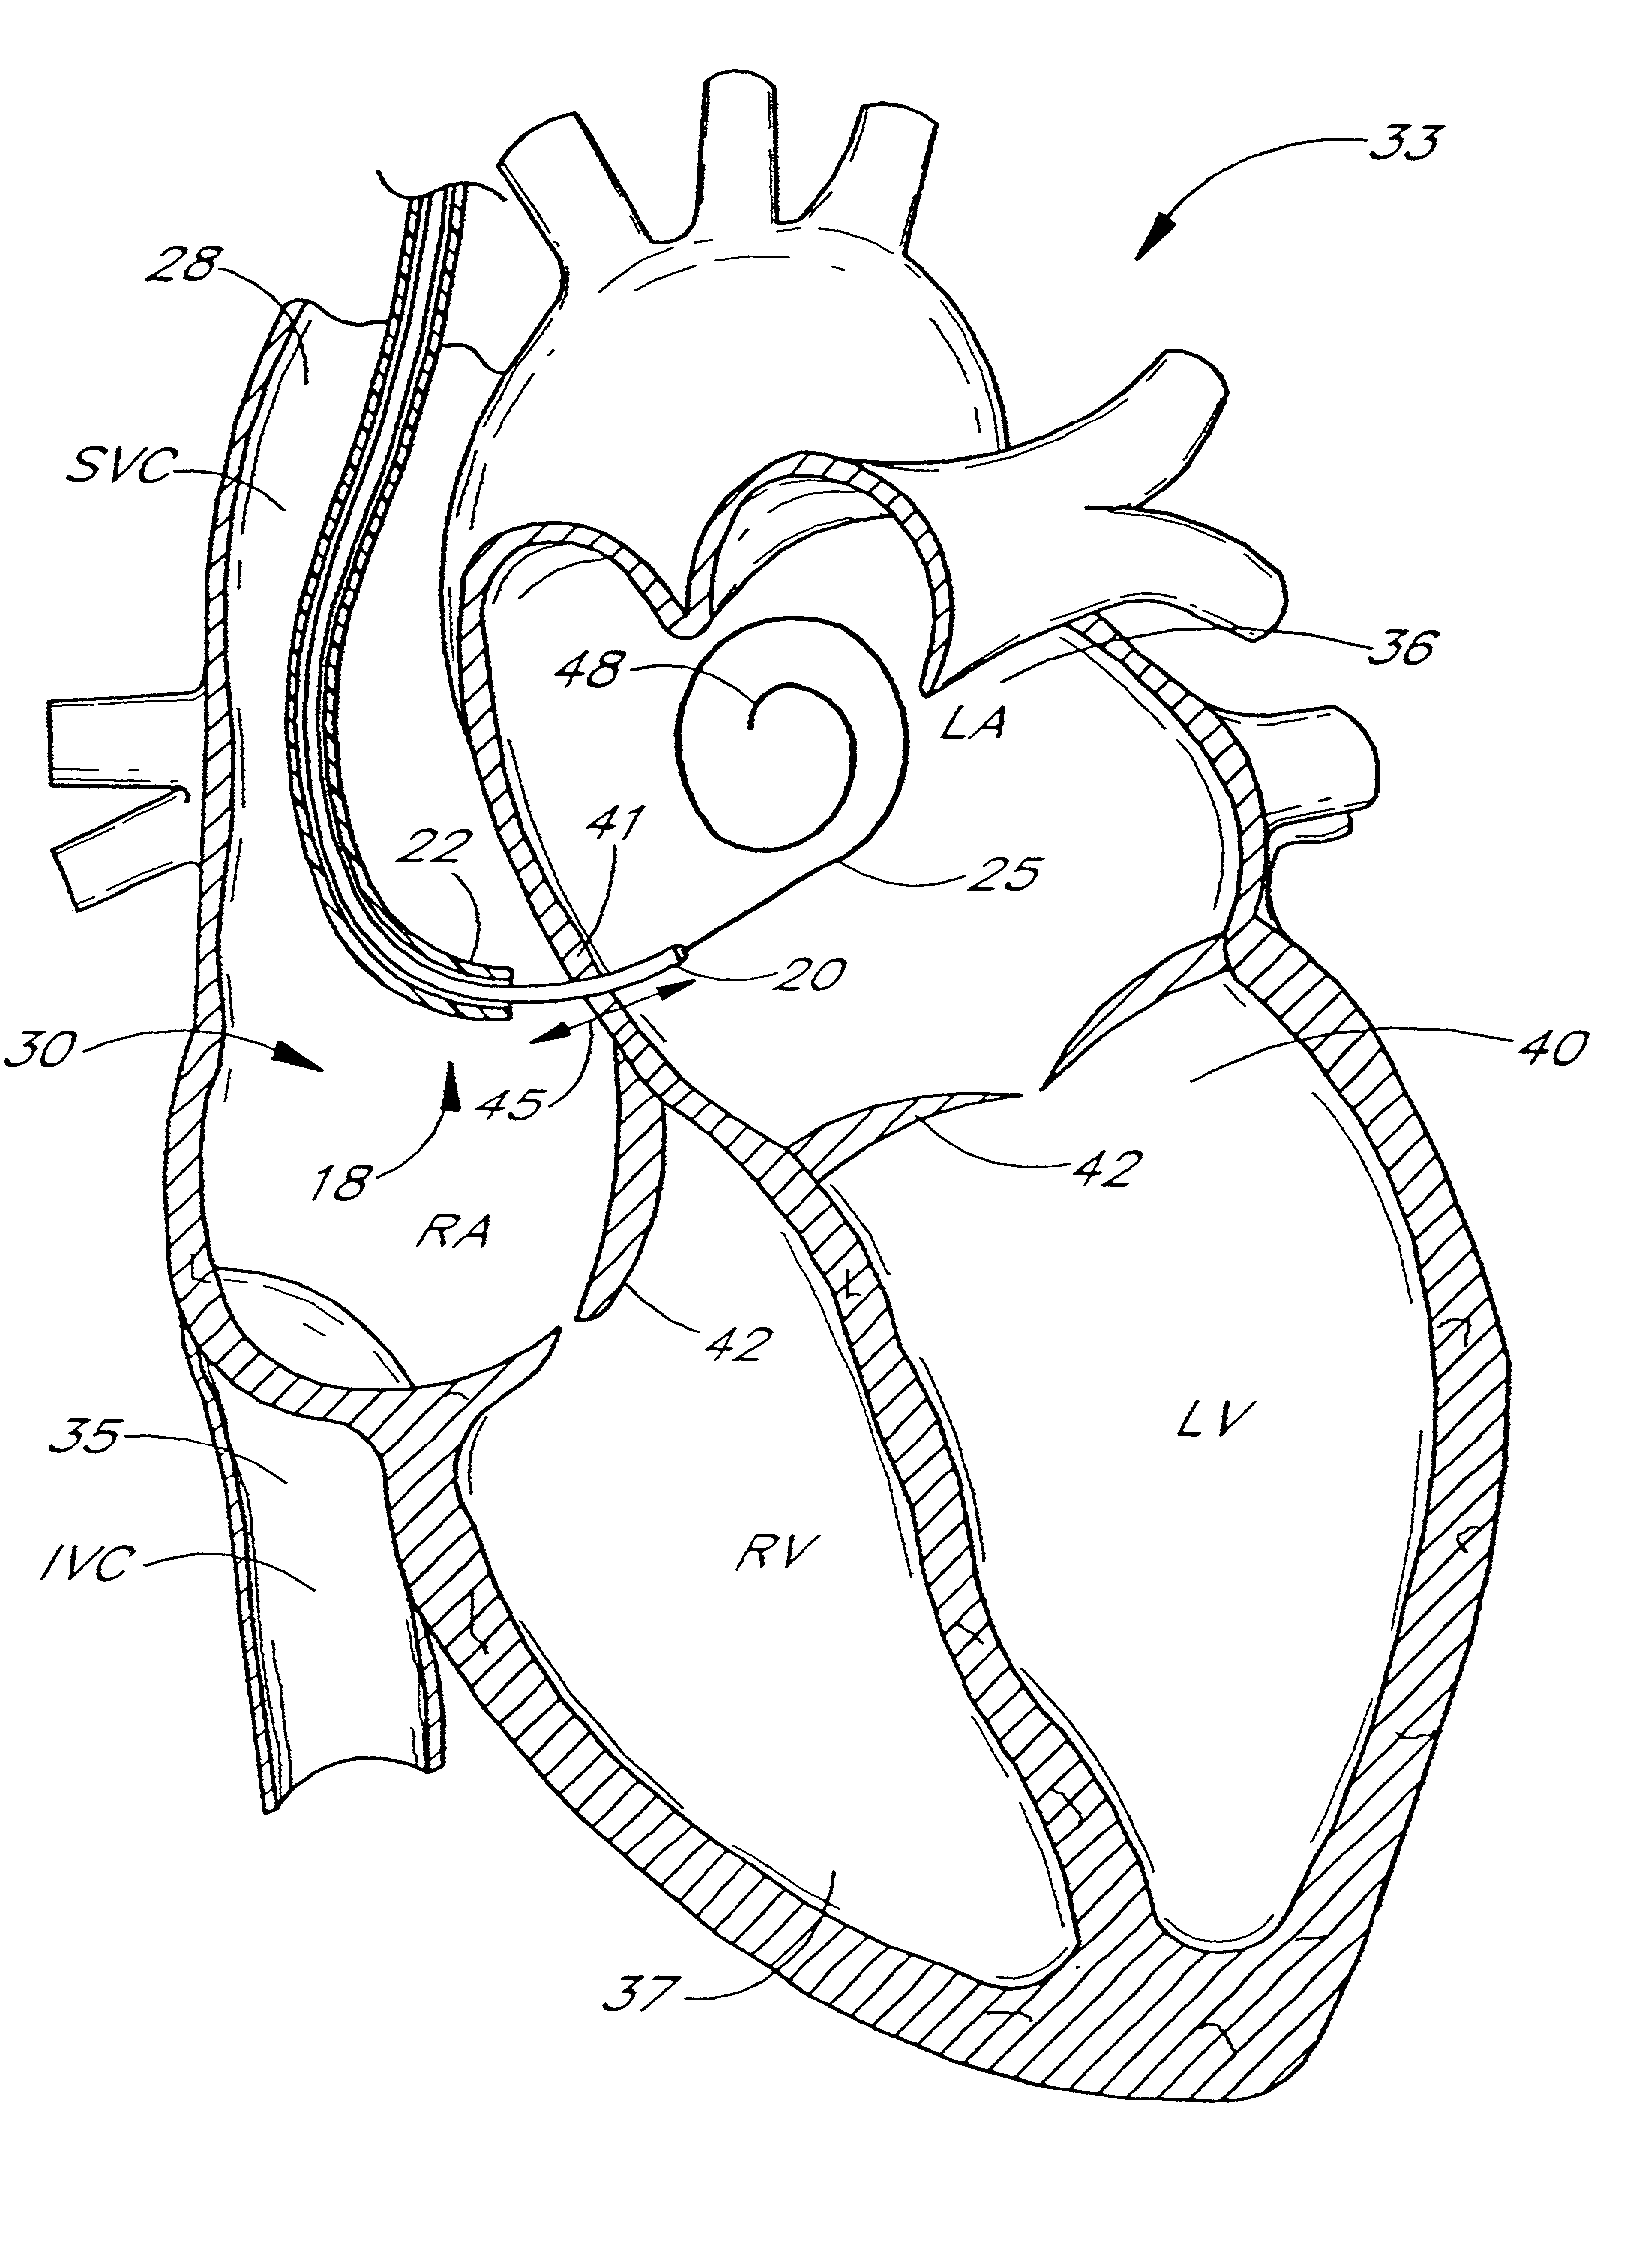 Systems and methods for detecting, diagnosing and treating congestive heart failure